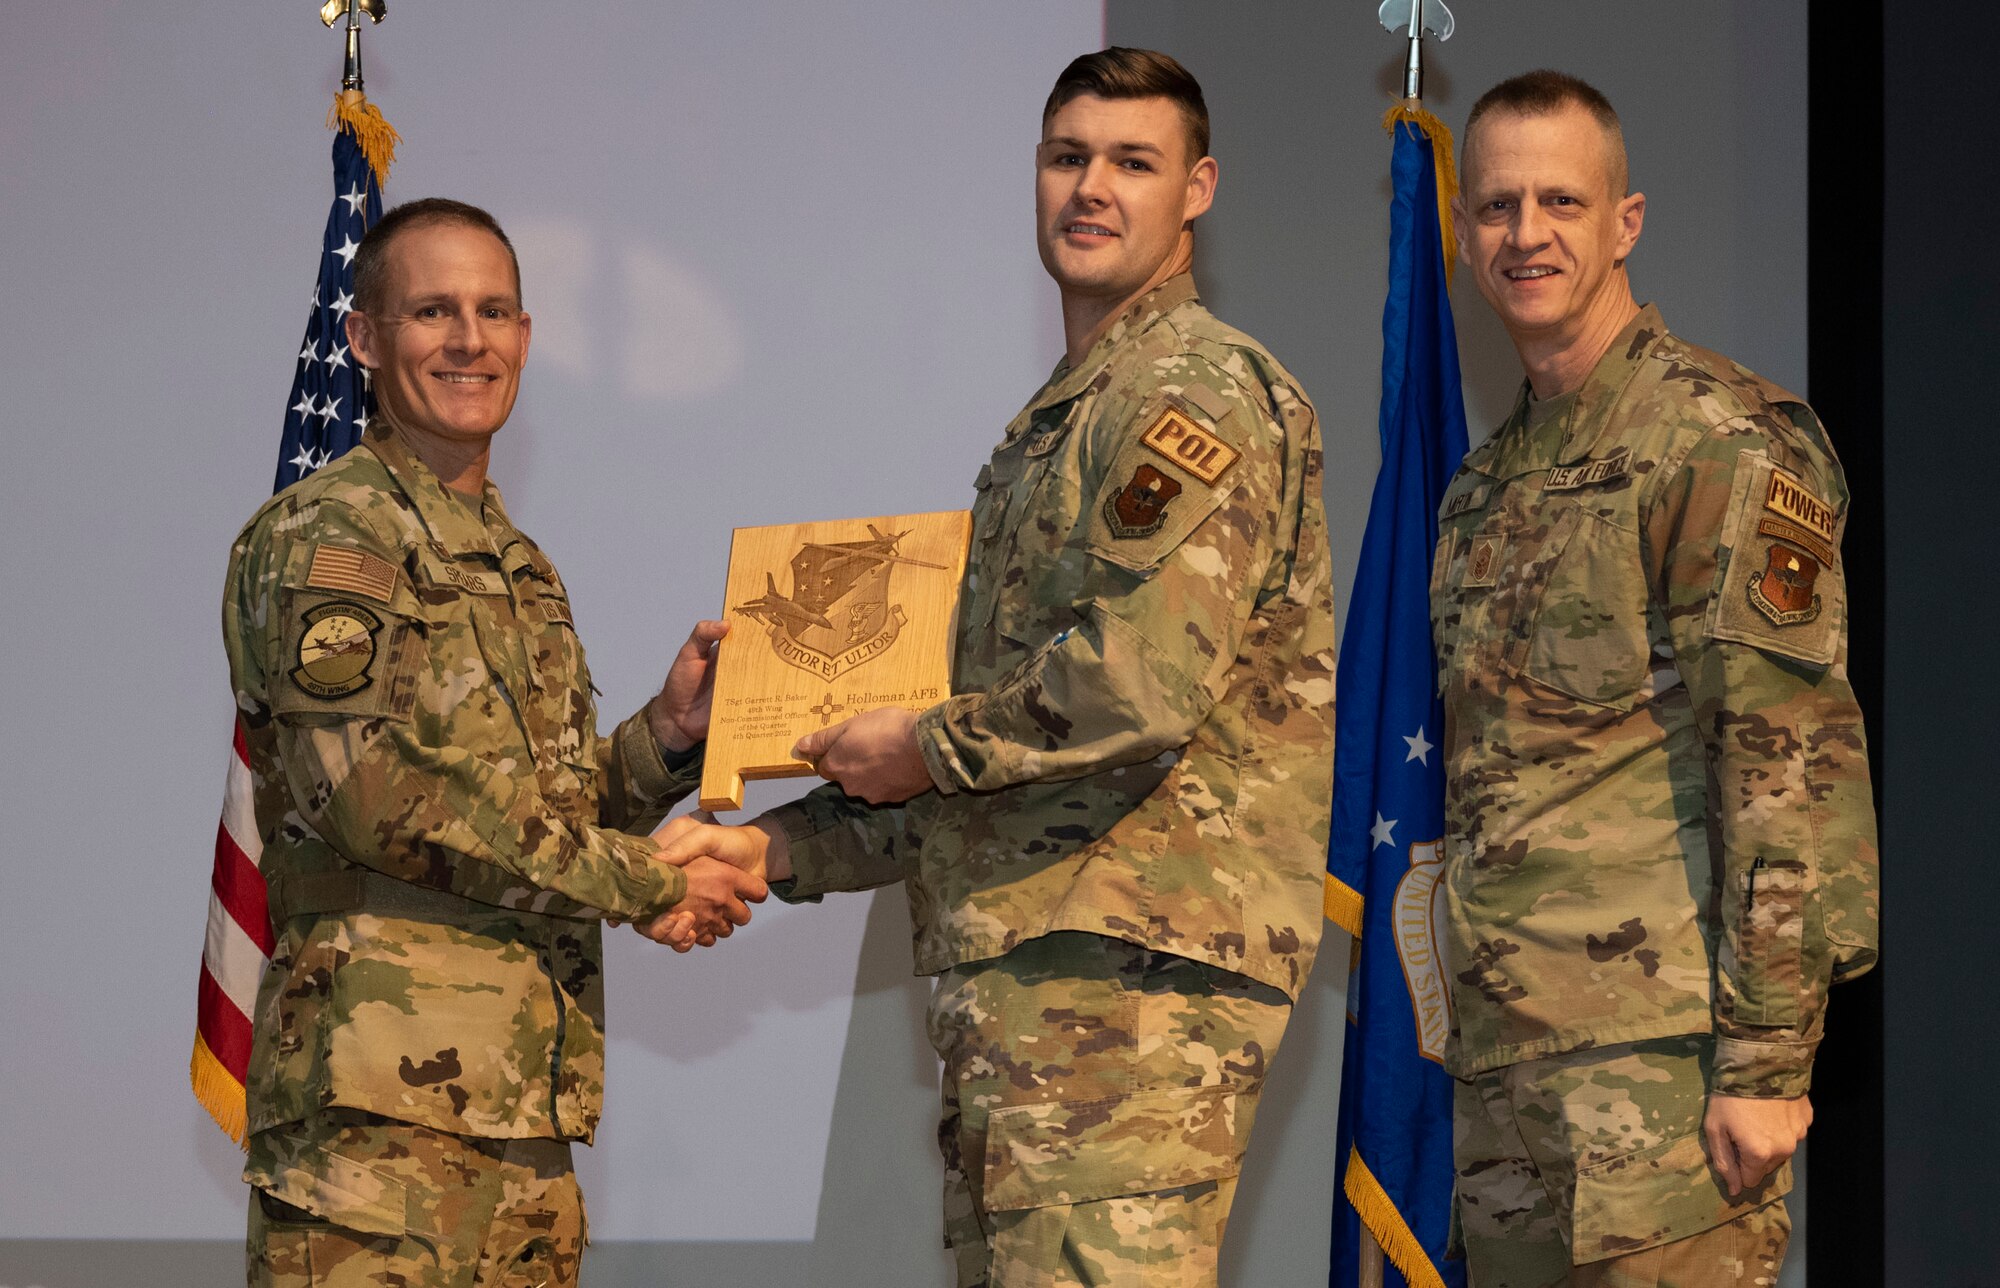 U.S. Air Force Tech. Sgt. Garrett Baker, from the 49th Logistics Readiness Squadron, accepts the Non-commissioned Officer of the Quarter Award, during the 49th Wing’s 4th Quarter Award ceremony at Holloman Air Force Base, New Mexico, Feb. 2, 2023. Quarterly award winners were selected based on their technical expertise, demonstration of leadership and job performance. (U.S. Air Force photo by Senior Airman Antonio Salfran)